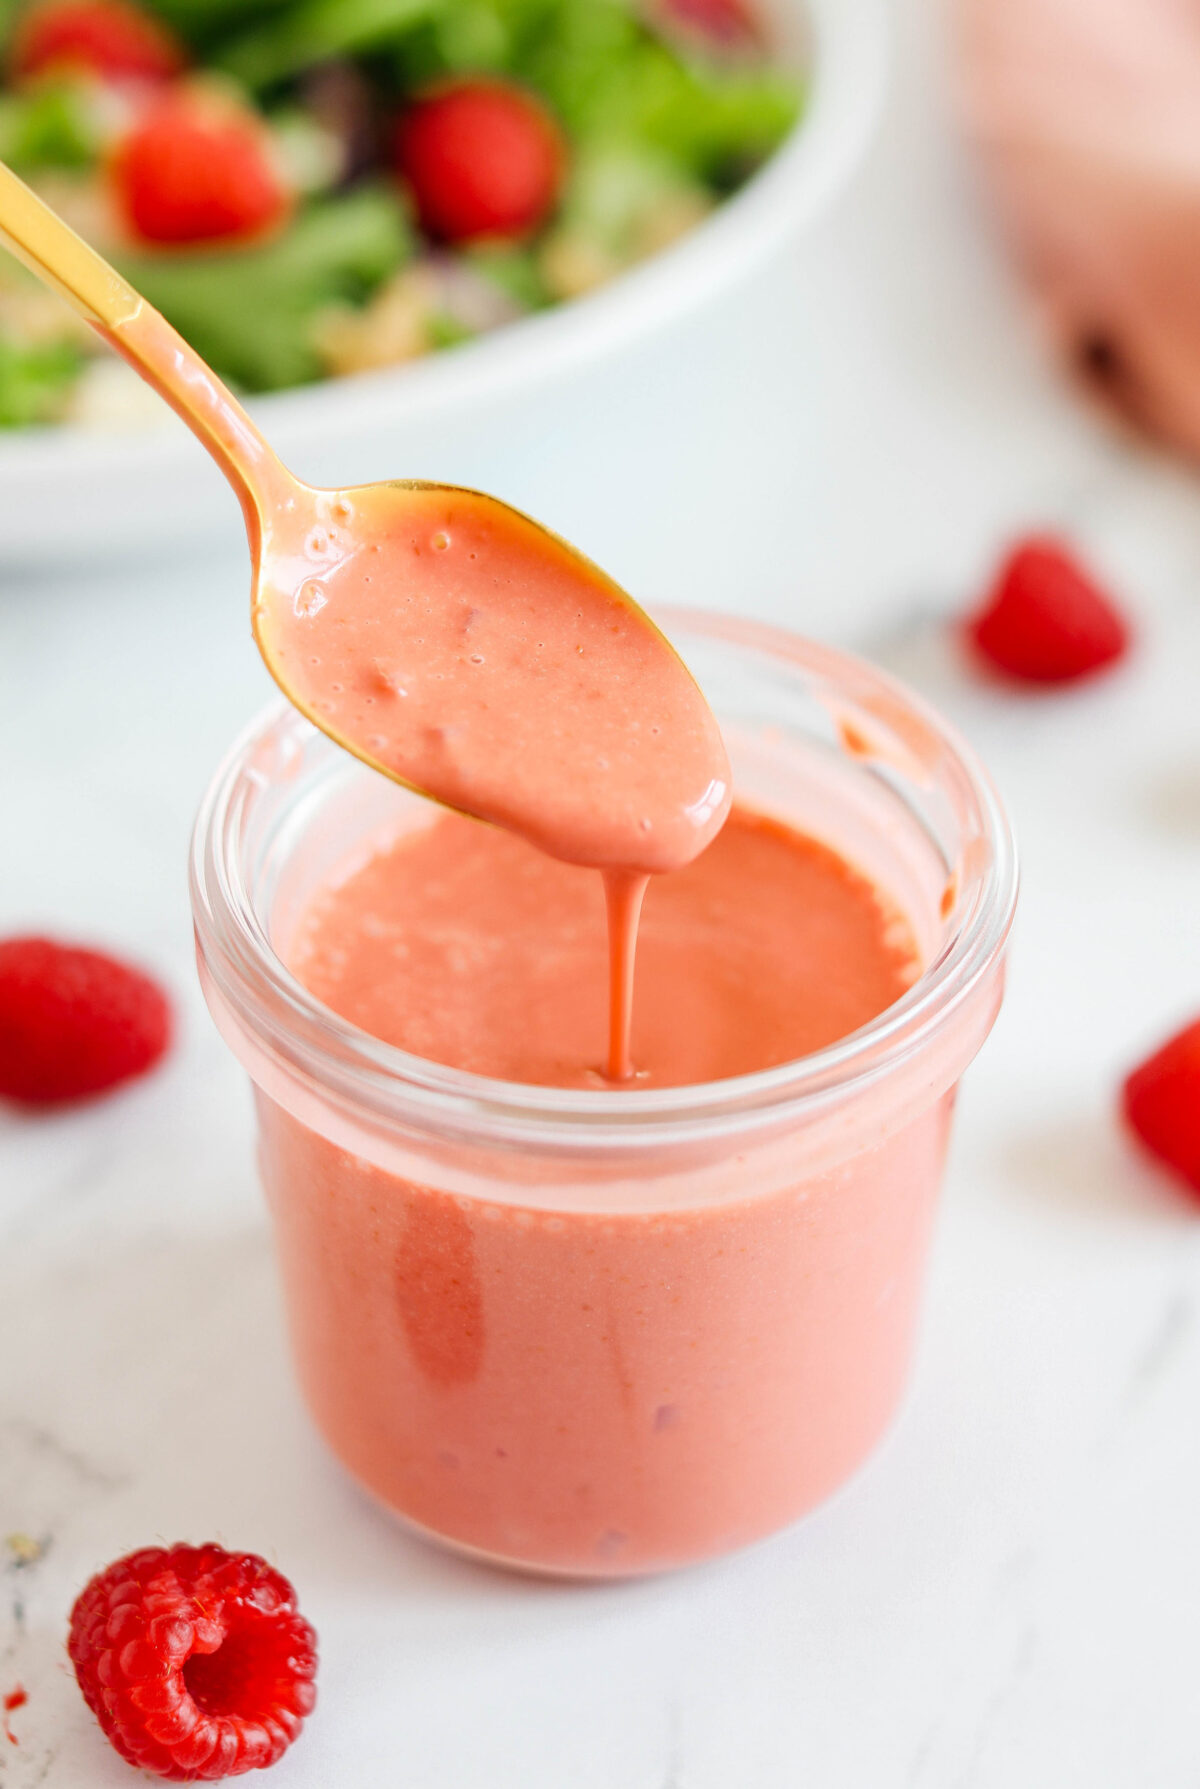 This Easy Raspberry Vinaigrette is a sweet and tangy homemade dressing that comes together in just 5 minutes!  Tastes so much better than store-bought dressings! 